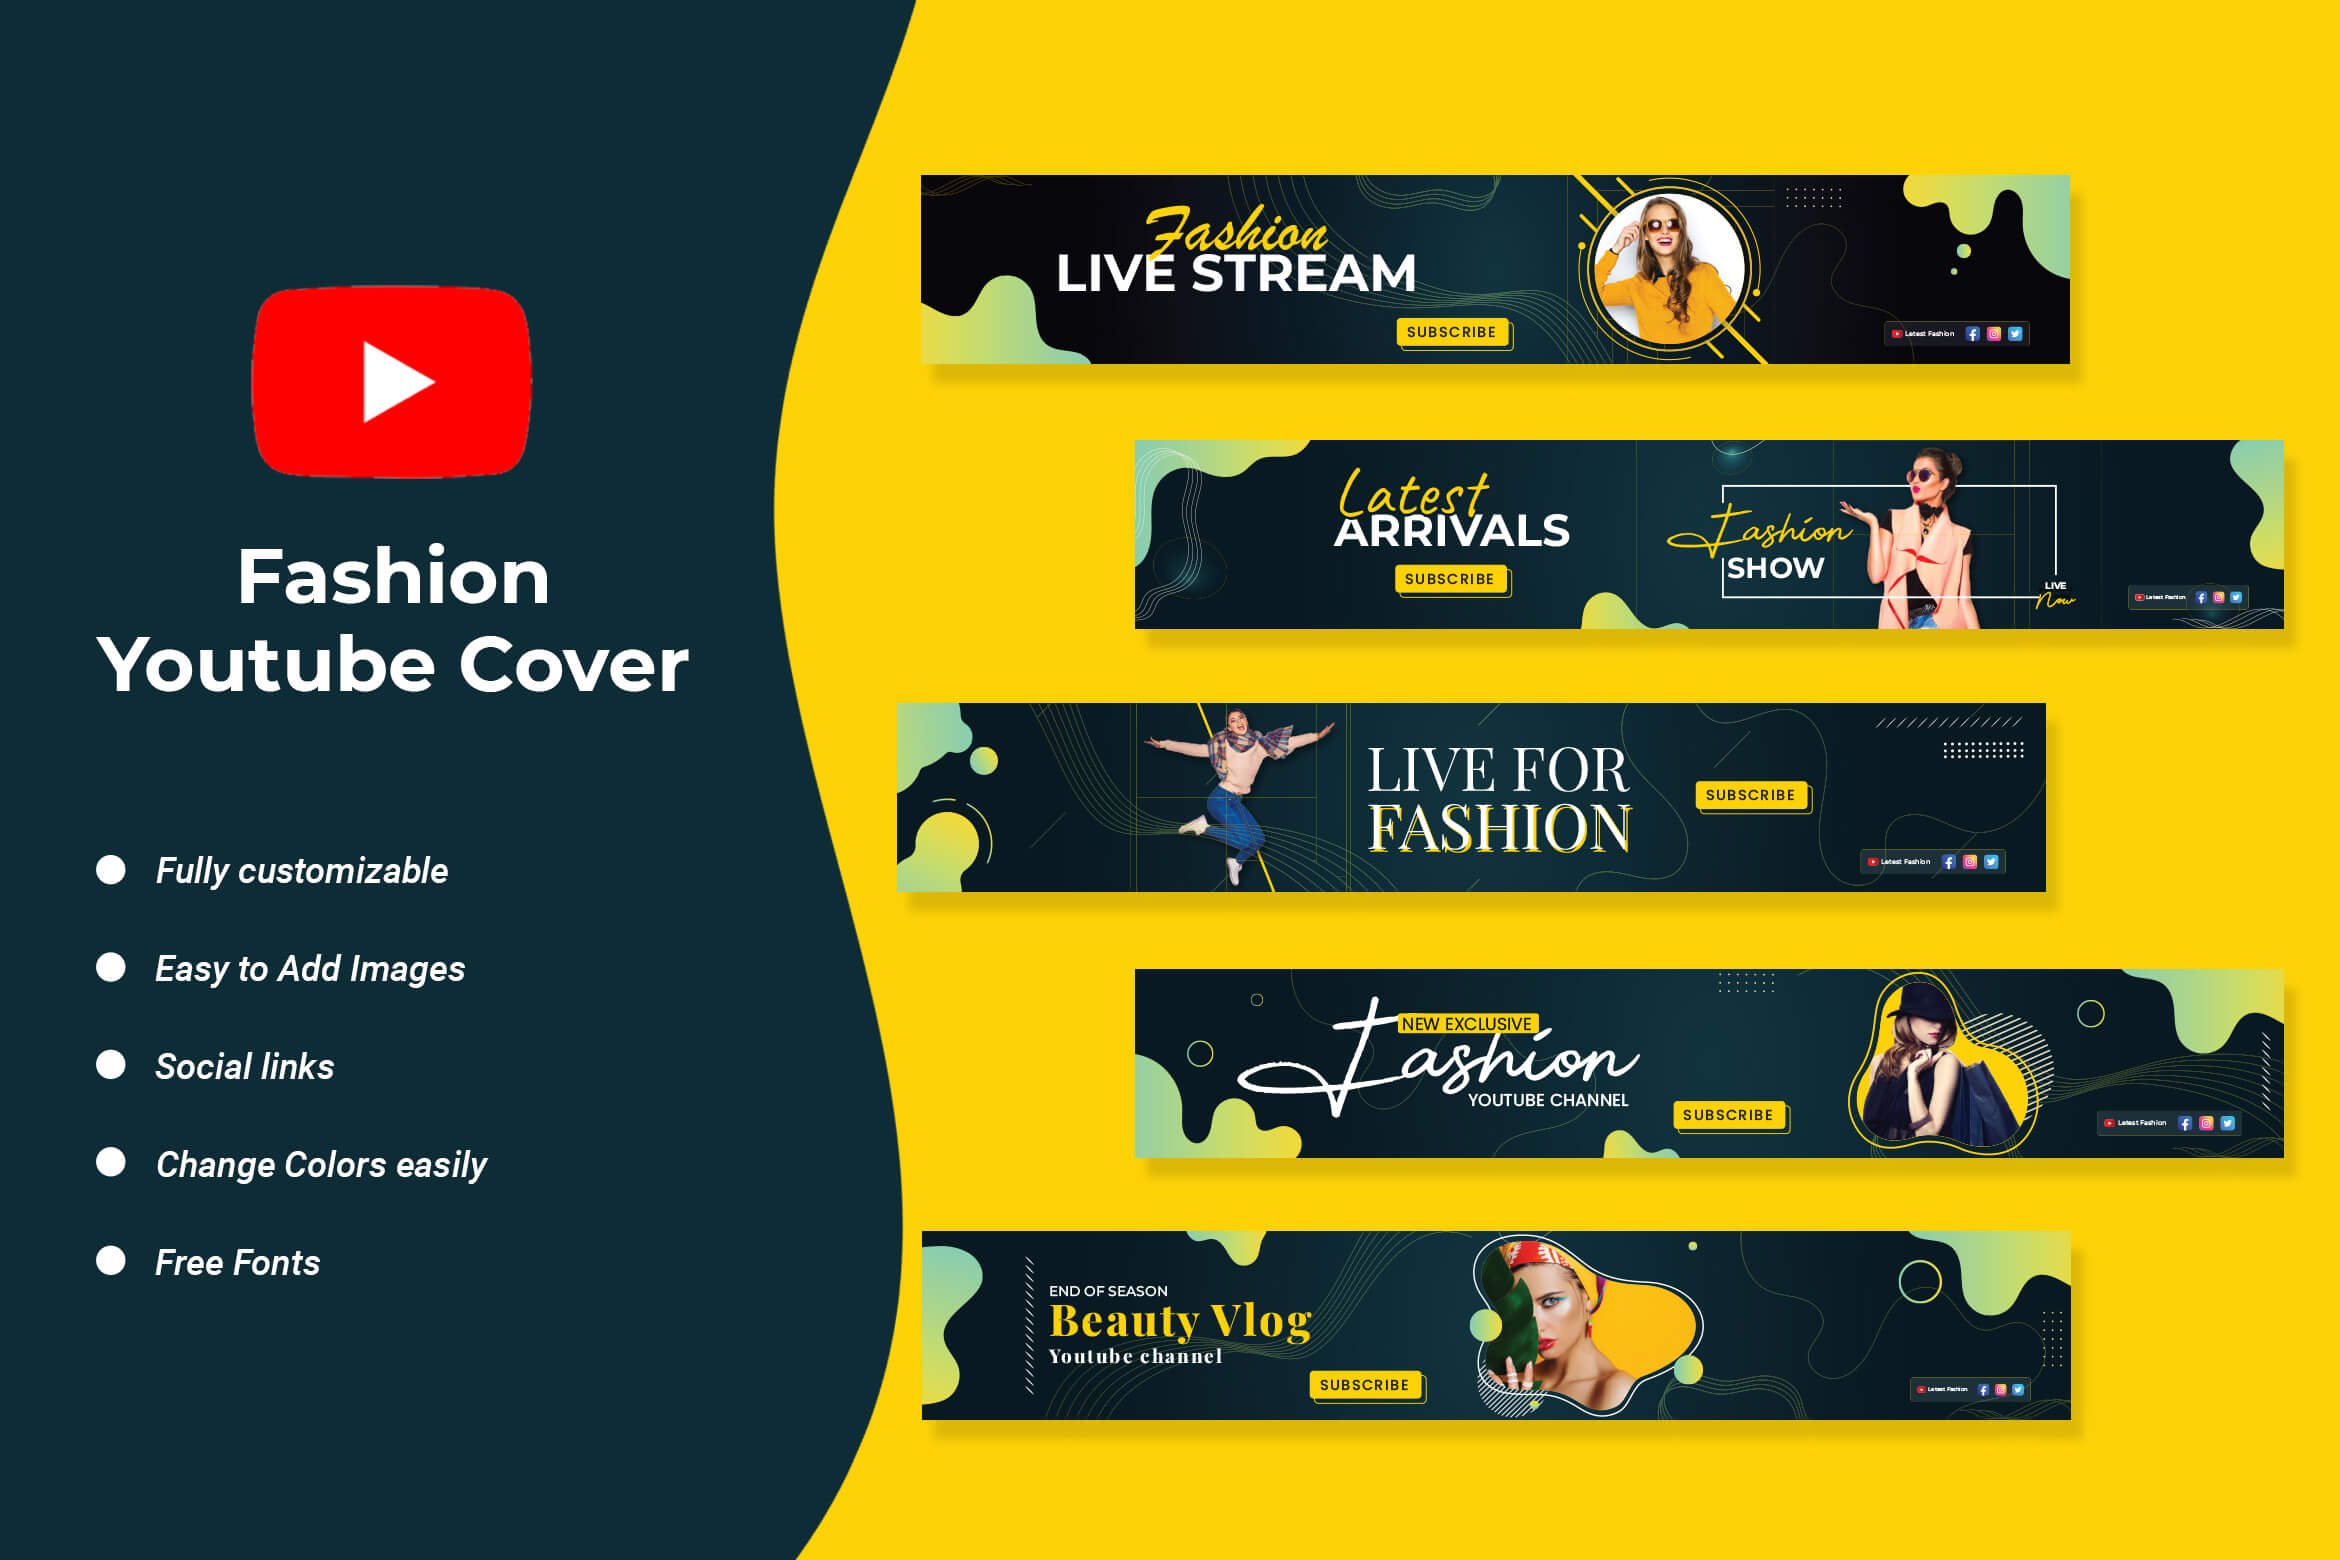 Fashion YouTube Cover Template